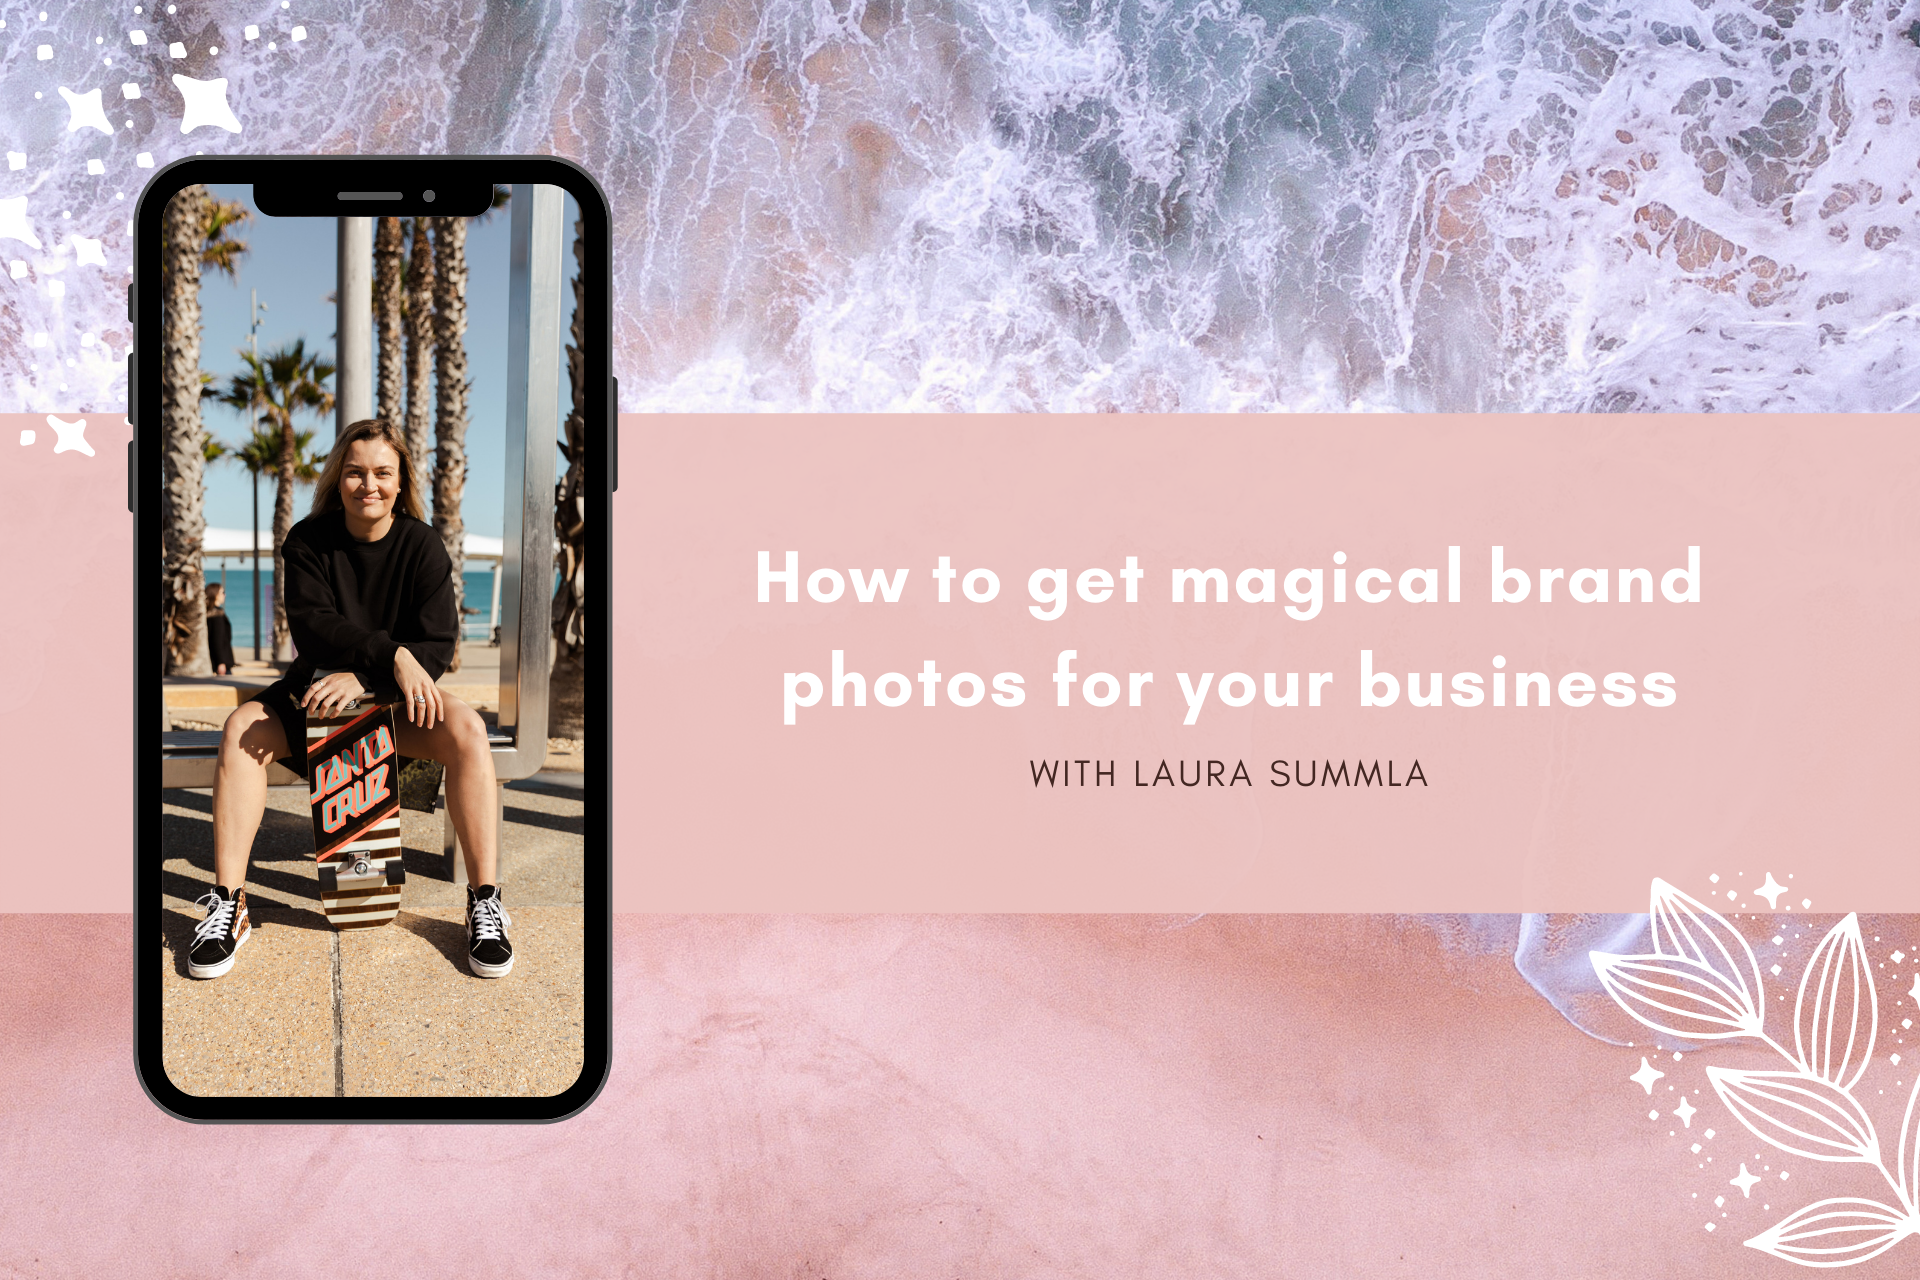 How to get magical brand photos for your business with Laura Summla